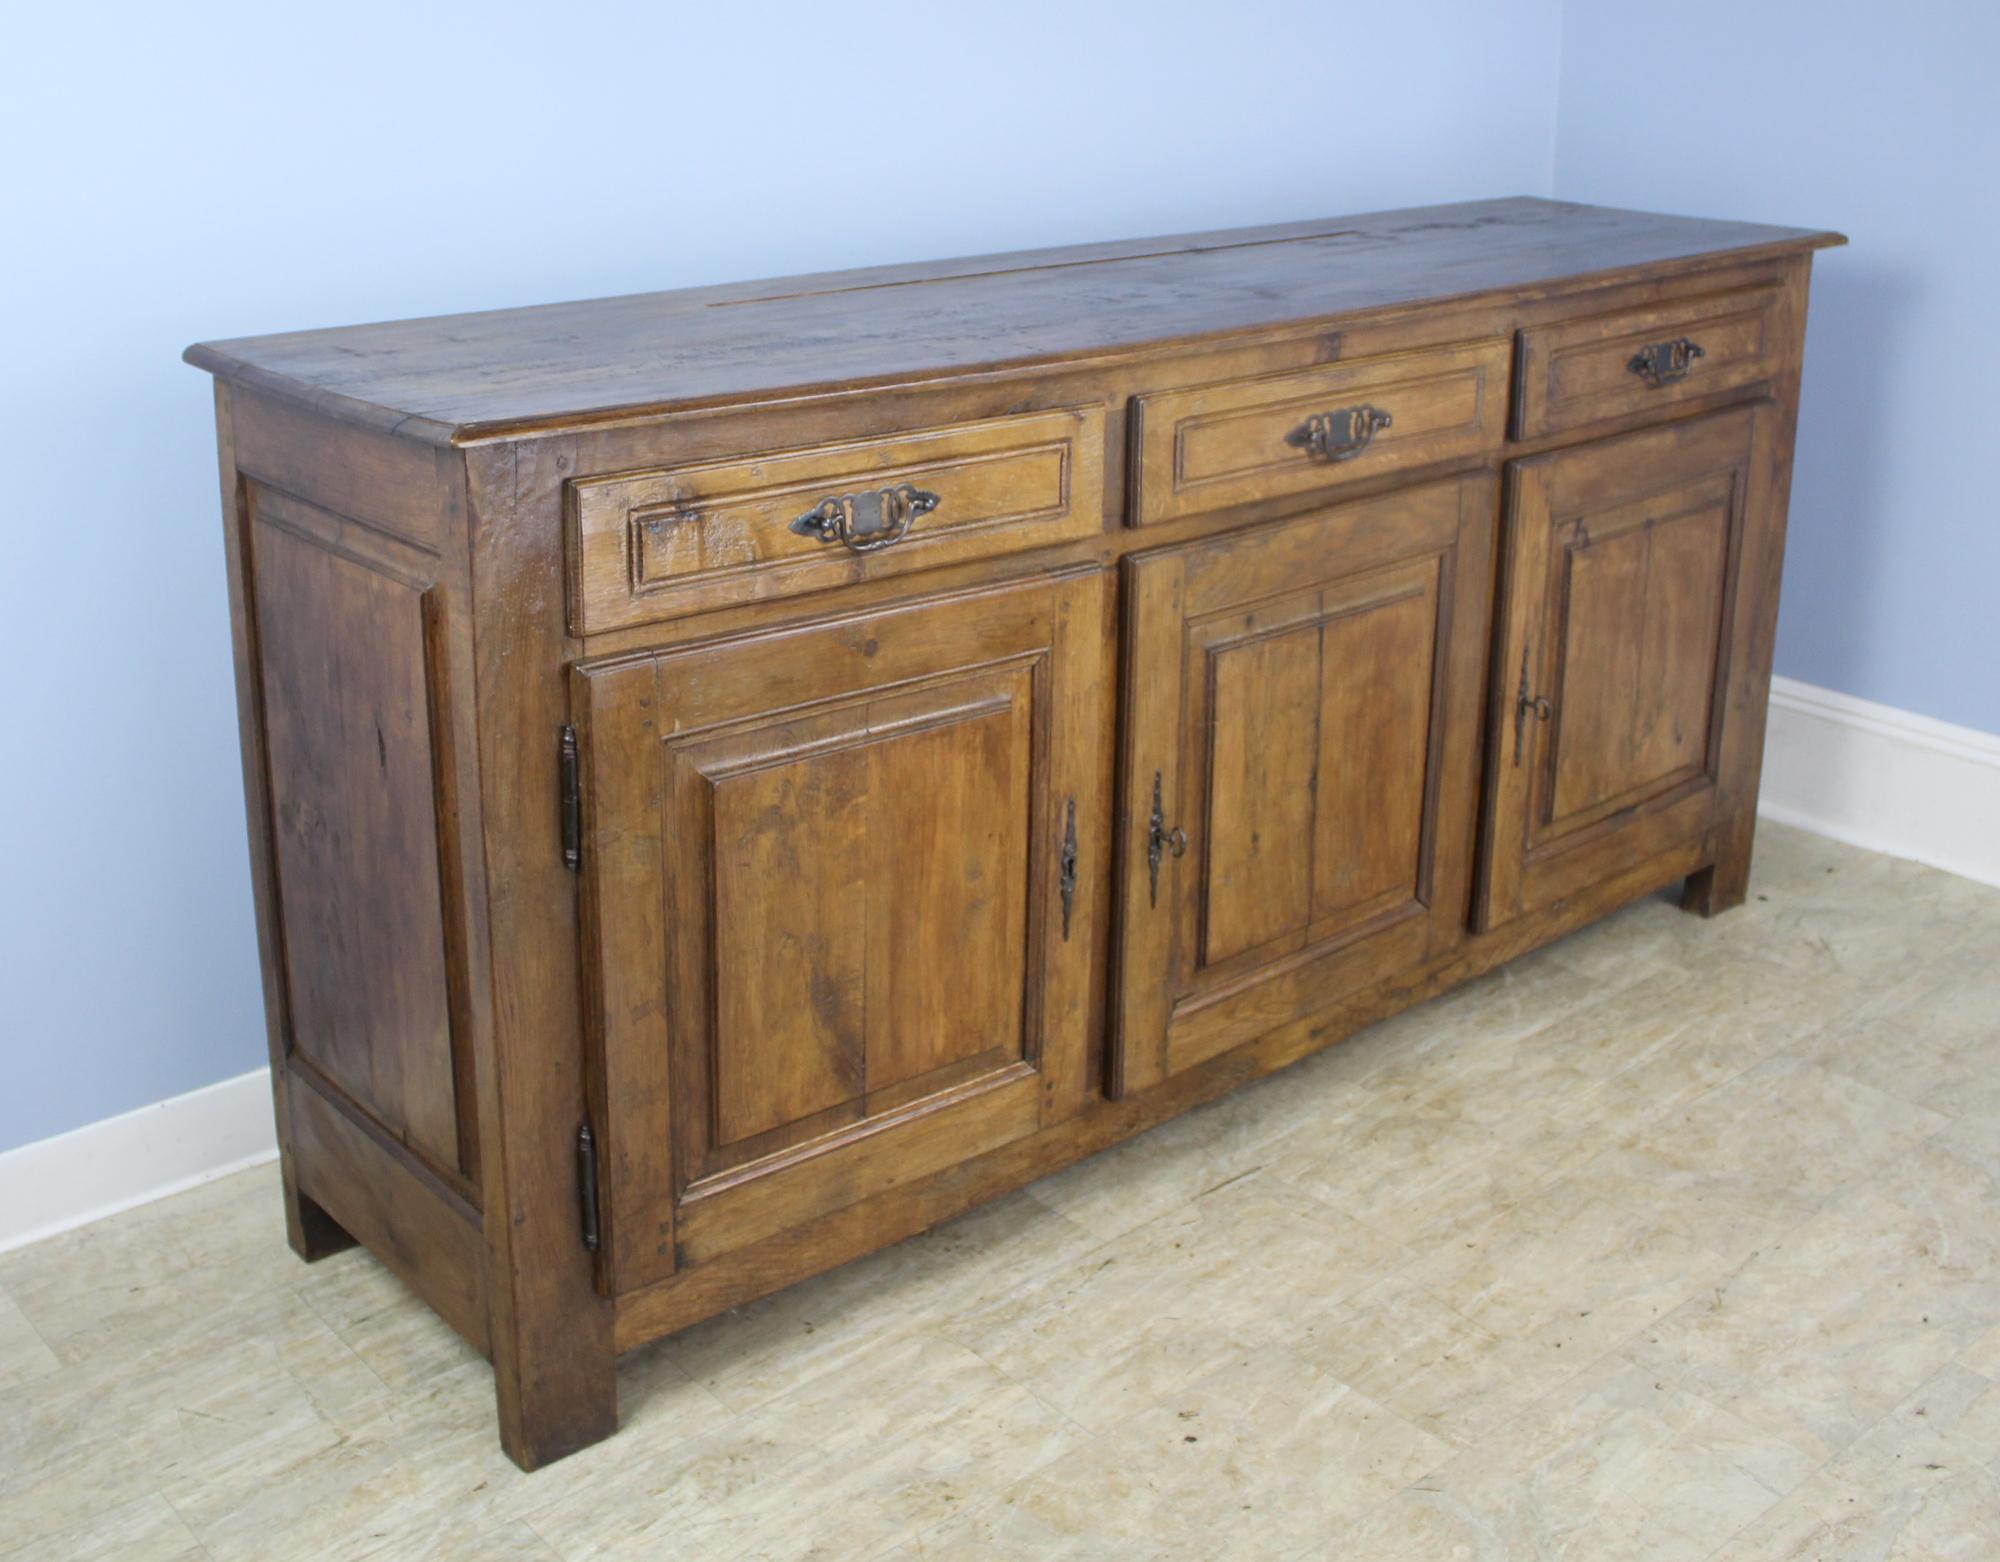 A handsome enfilade or three door French oak buffet with wonderful oak grain, color and patina. The carved panels on the doors and sides give this simple sturdy piece a note of good design interest. There is no separation between the two left doors,